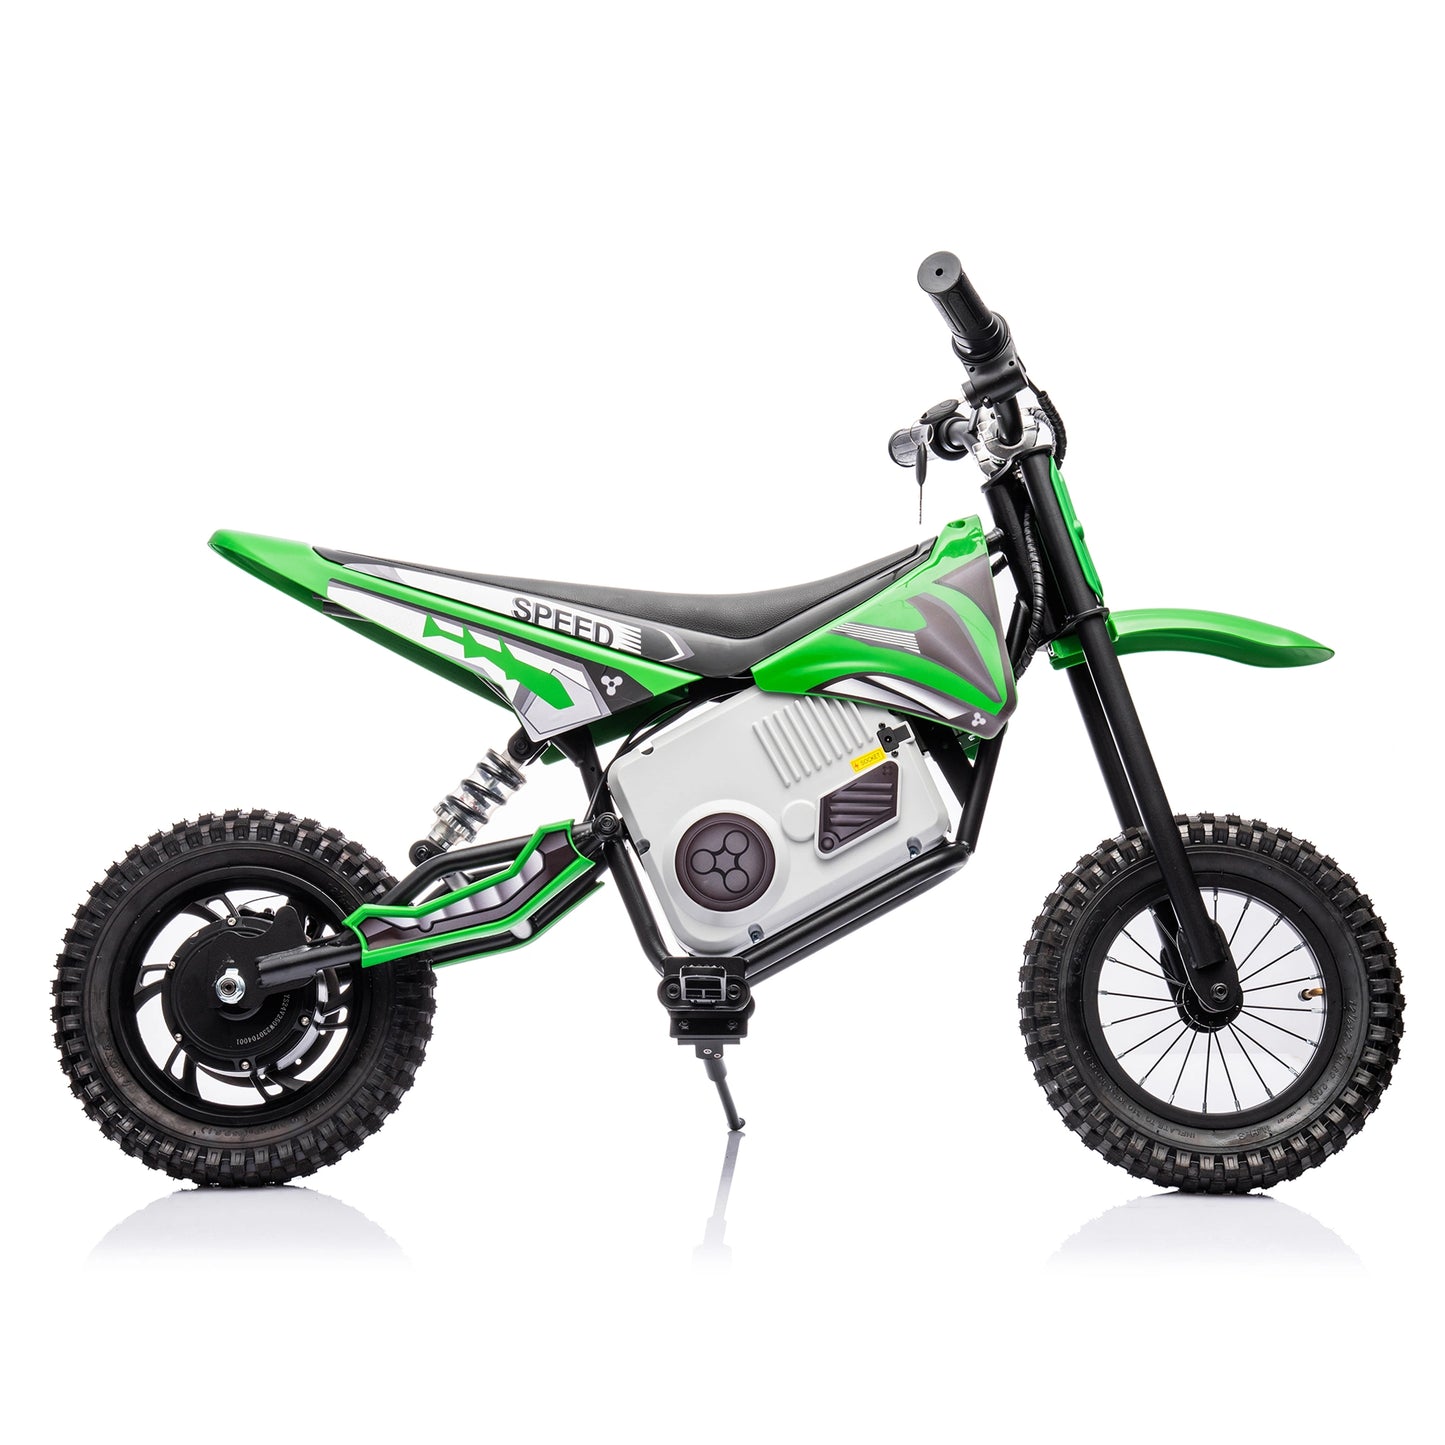 Electric mini dirt motorcycle for kids 350w xxxl motorcycle 36V Green